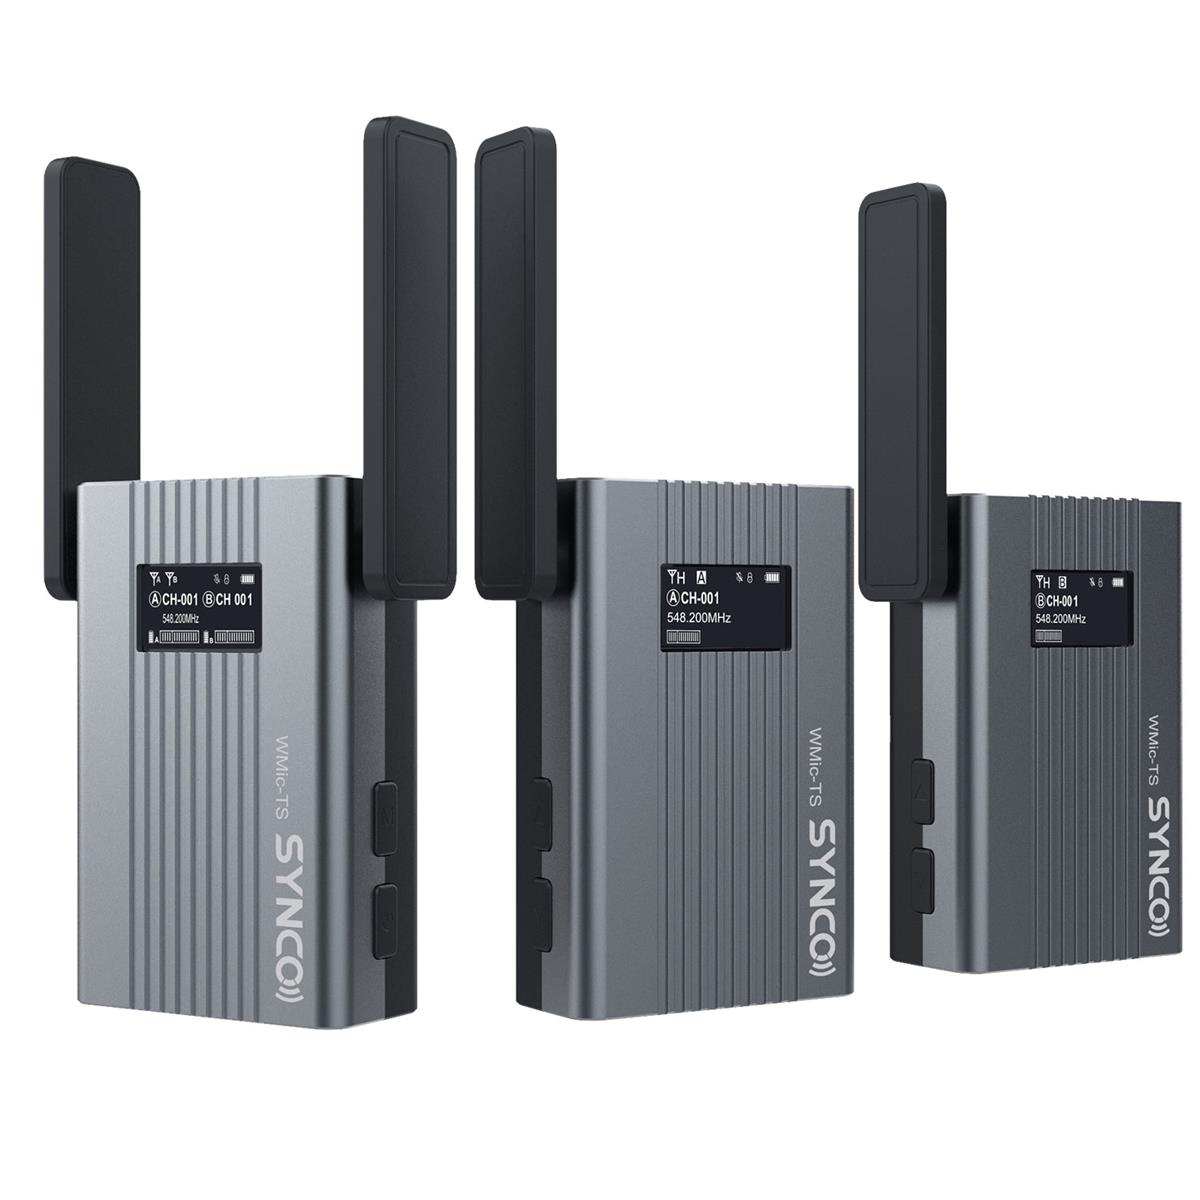 Image of Synco Audio SYNCO Wmic-TS UHF Wireless Microphone System with 2x Transmitter and 1x Receiver